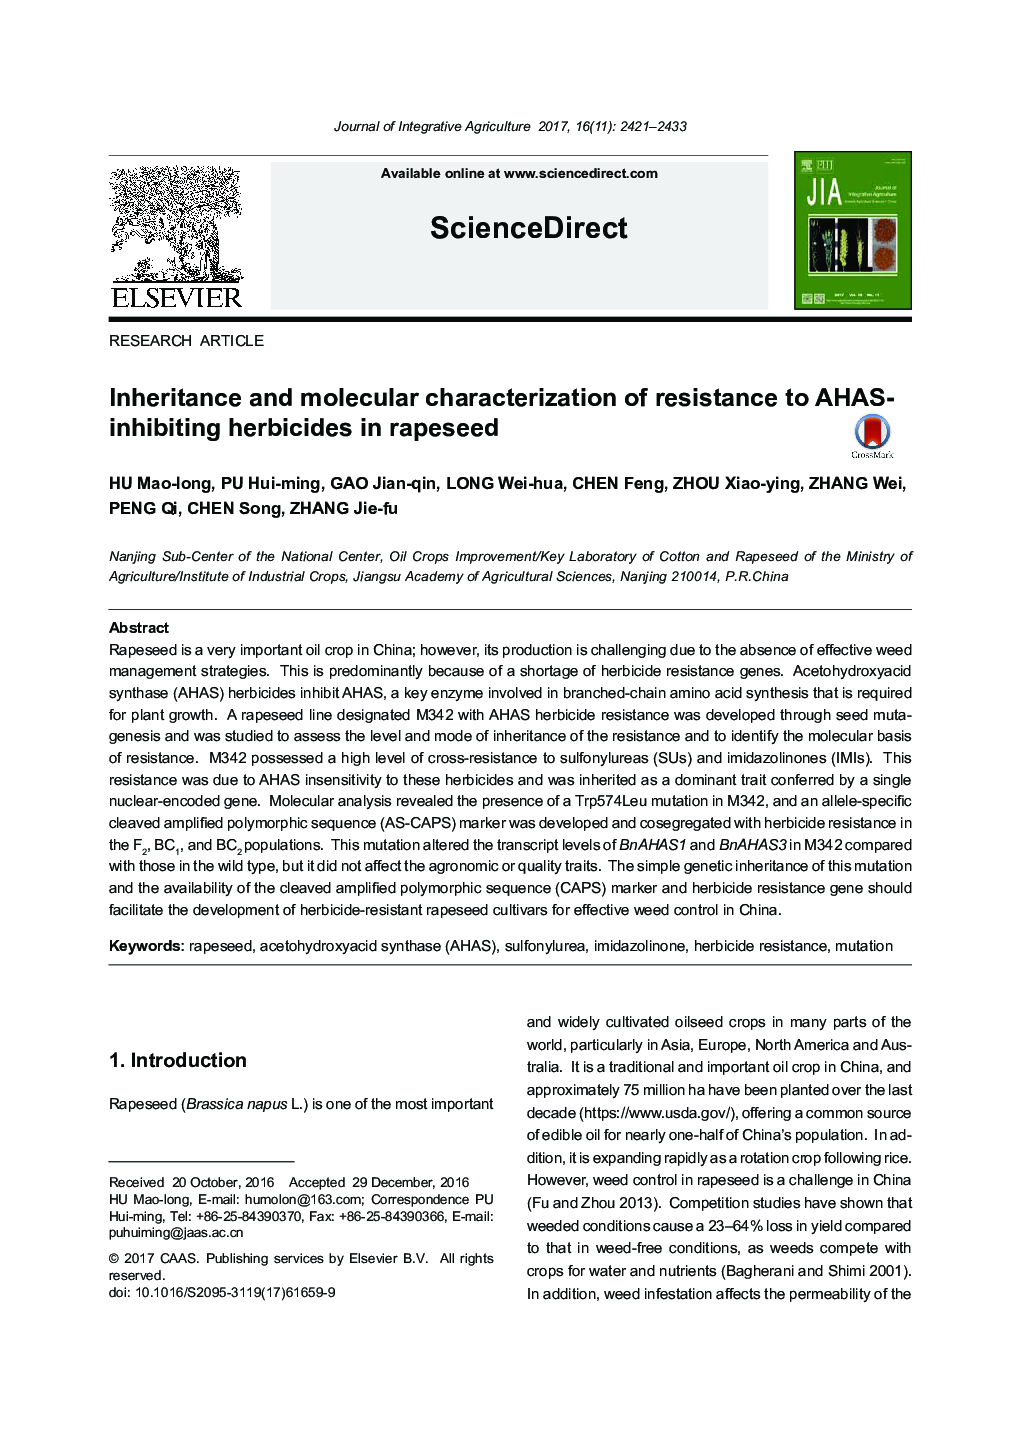 Inheritance and molecular characterization of resistance to AHAS-inhibiting herbicides in rapeseed